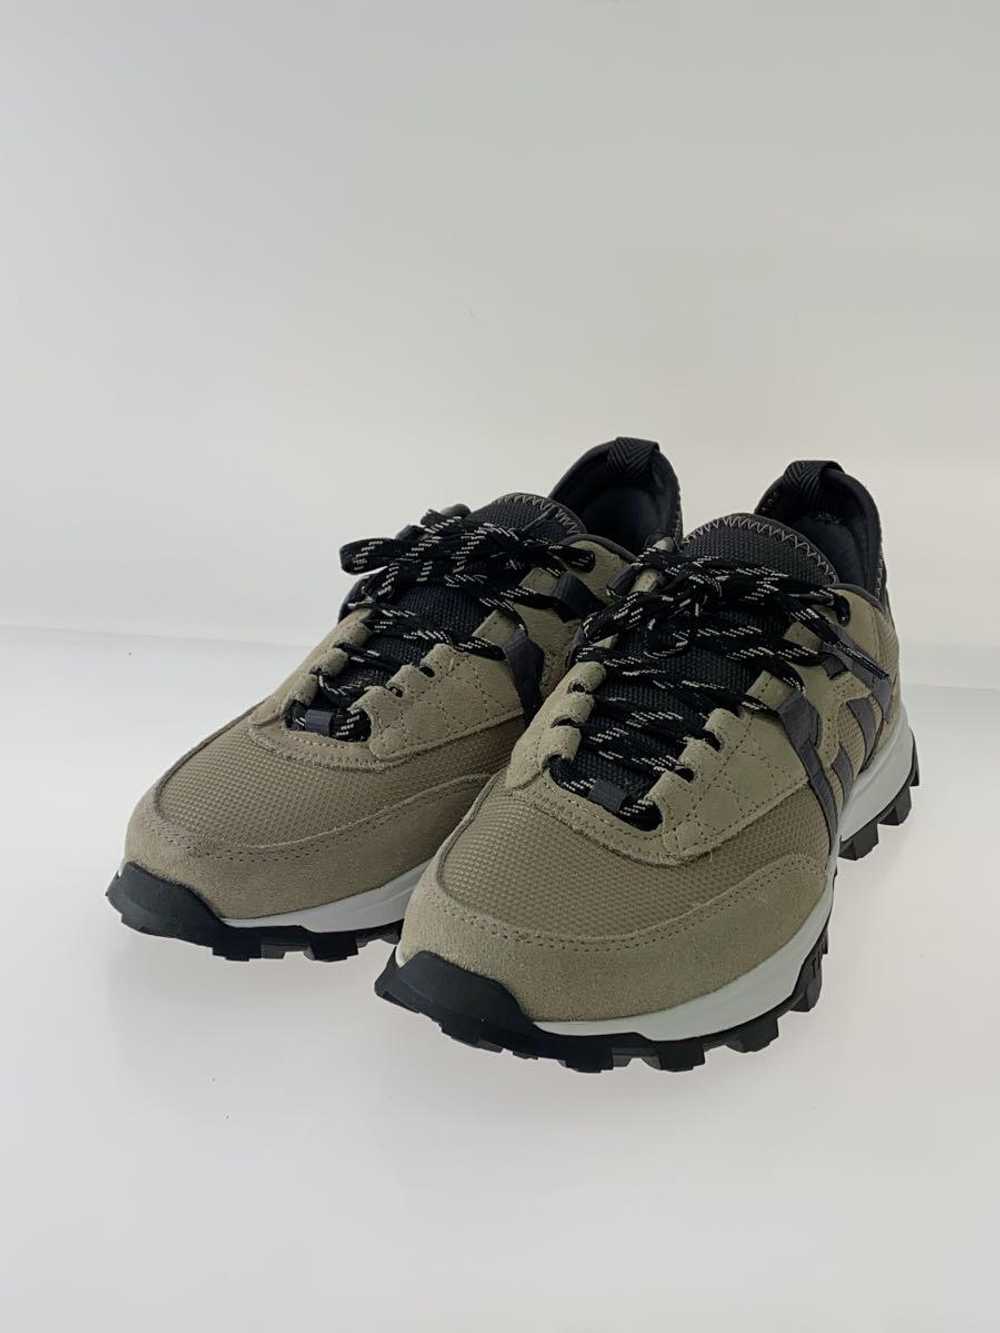 Men 7.5US Timberland Low-Cut Sneakers/Beg/A65G4 - image 2